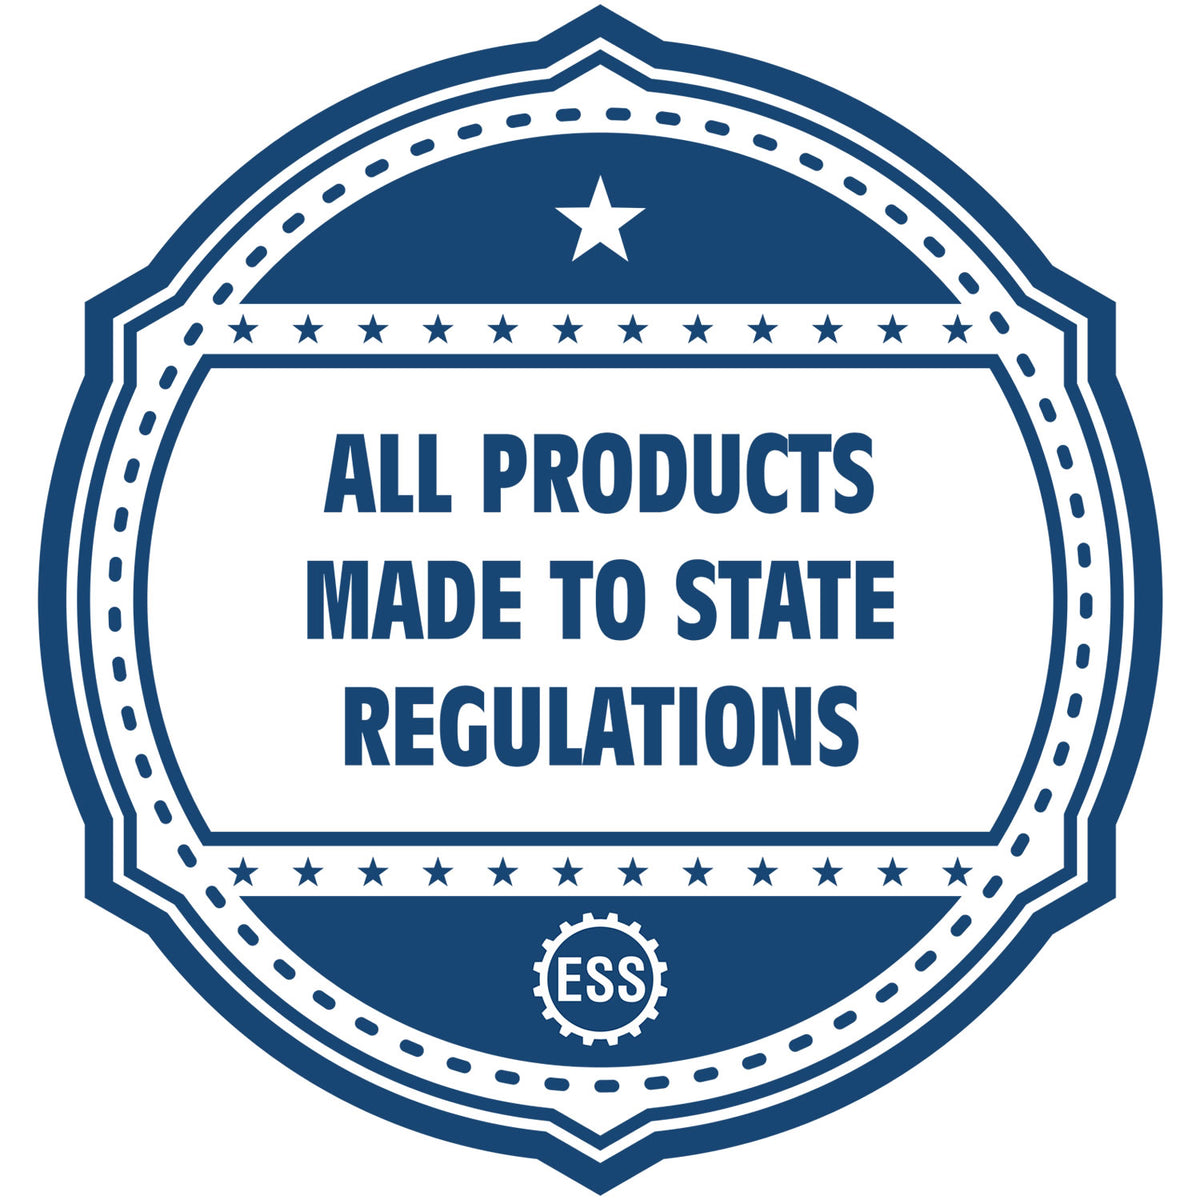 An icon or badge element for the Slim Pre-Inked State Seal Notary Stamp for Mississippi showing that this product is made in compliance with state regulations.